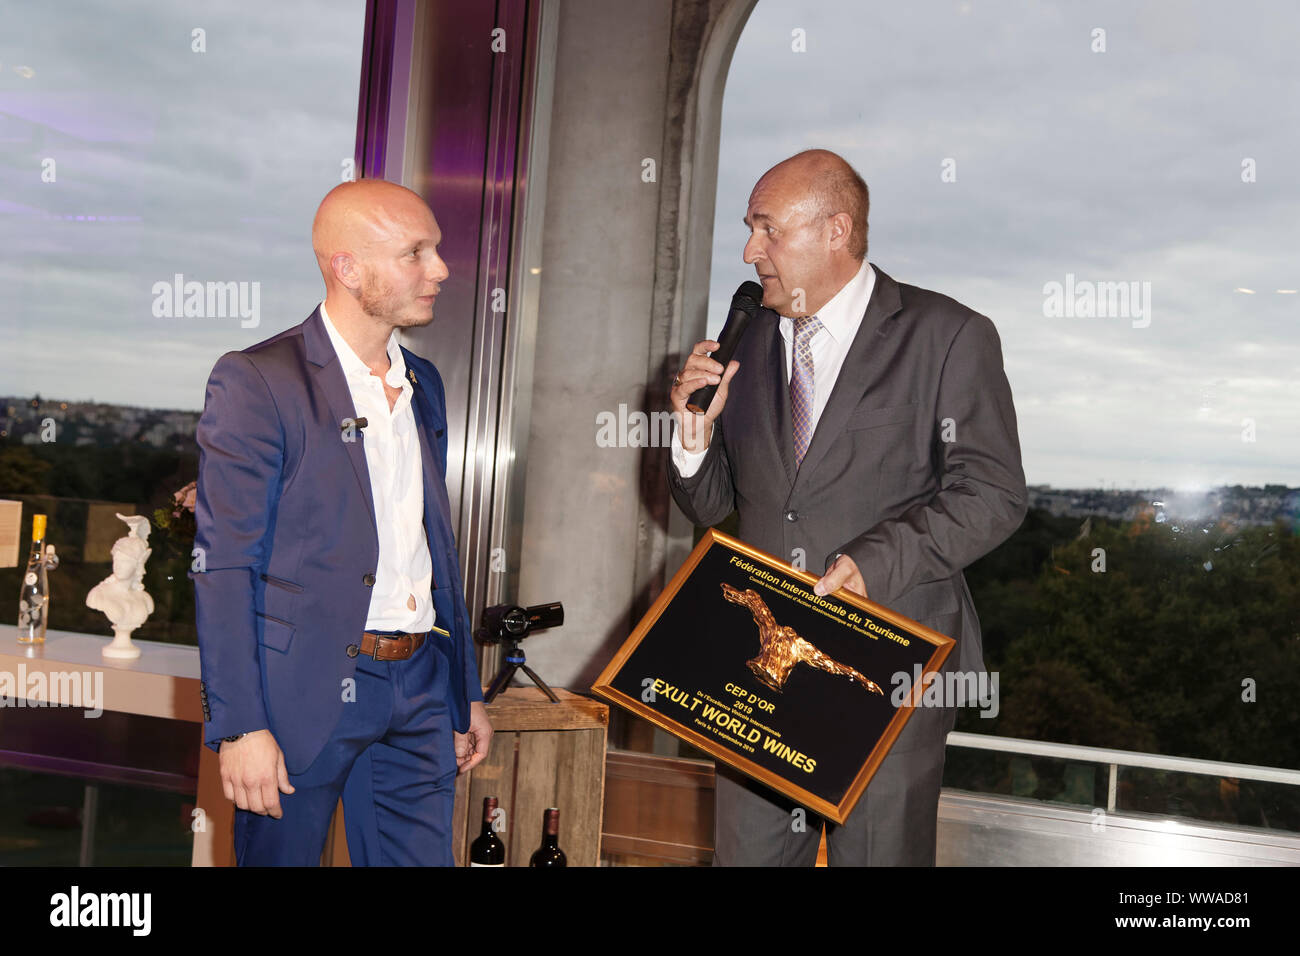 Paris, France. 13th Sep, 2019. Jean Eric De Saint Luc, President of the International Federation of Tourism awarded the CEP d'OR to David Zienkiewicz. Stock Photo